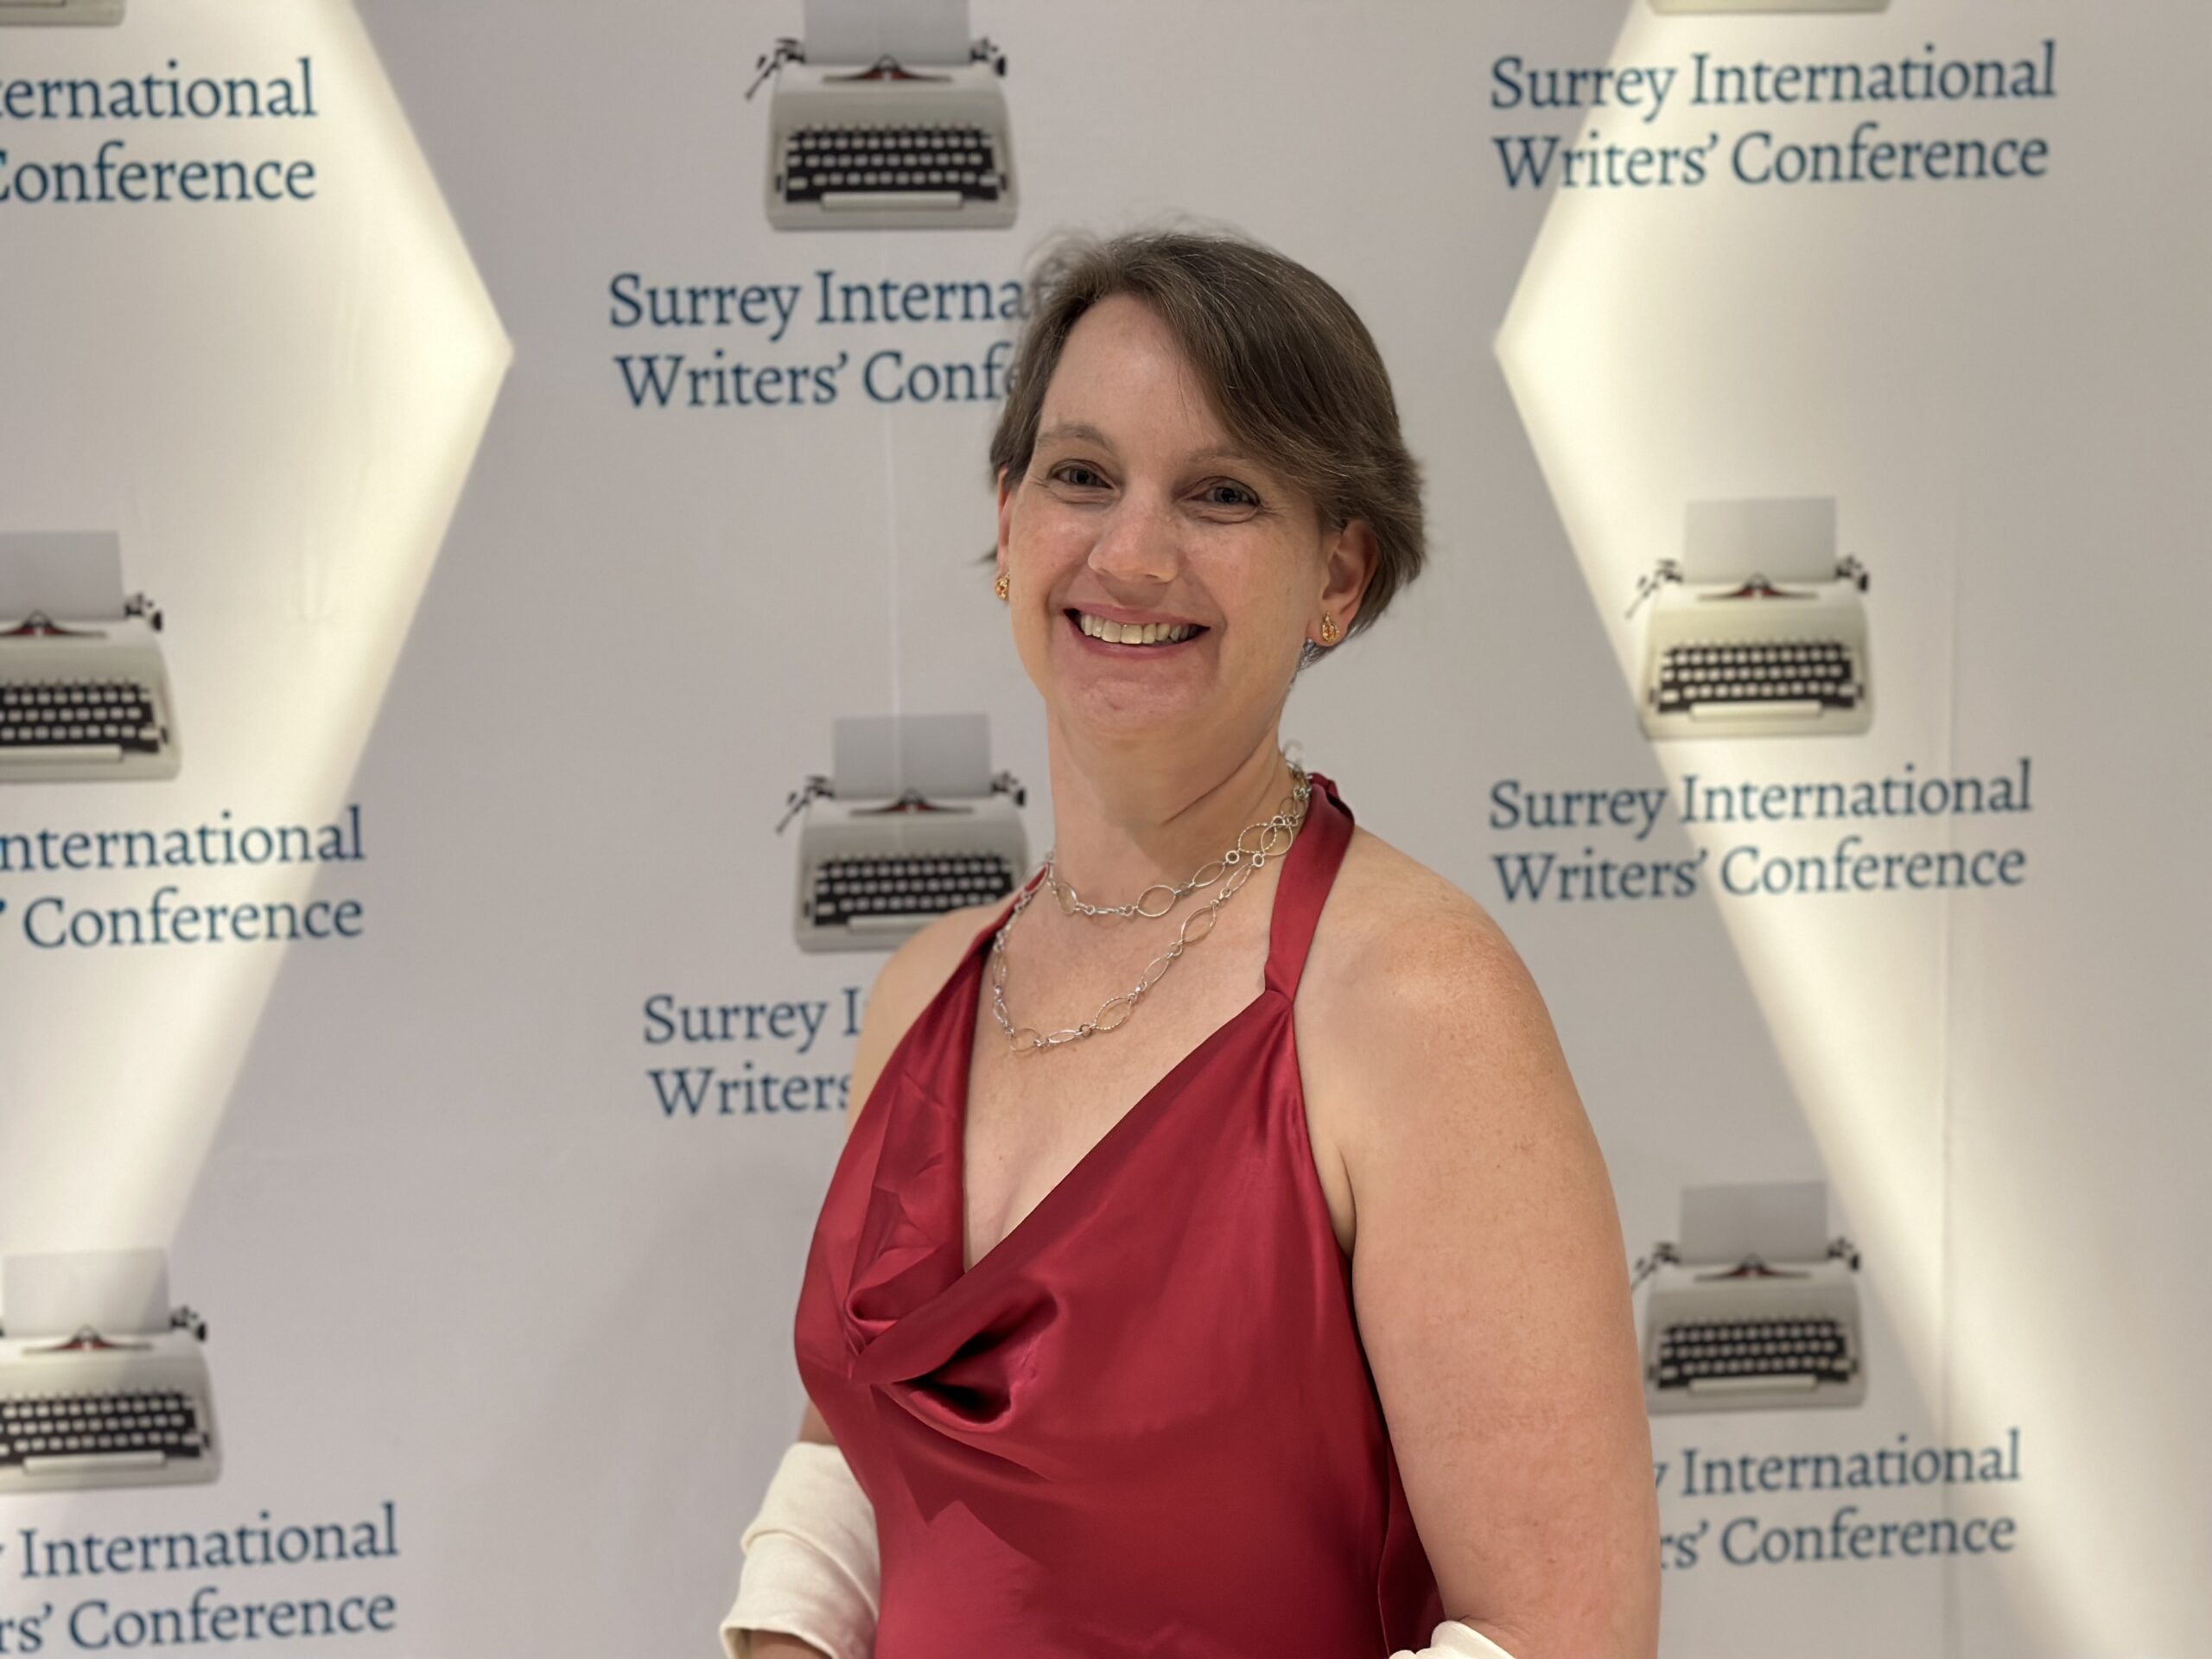 White person with short-ish brown hair in a red dress against a background with typwriters on it and Surrey International Writers Conference